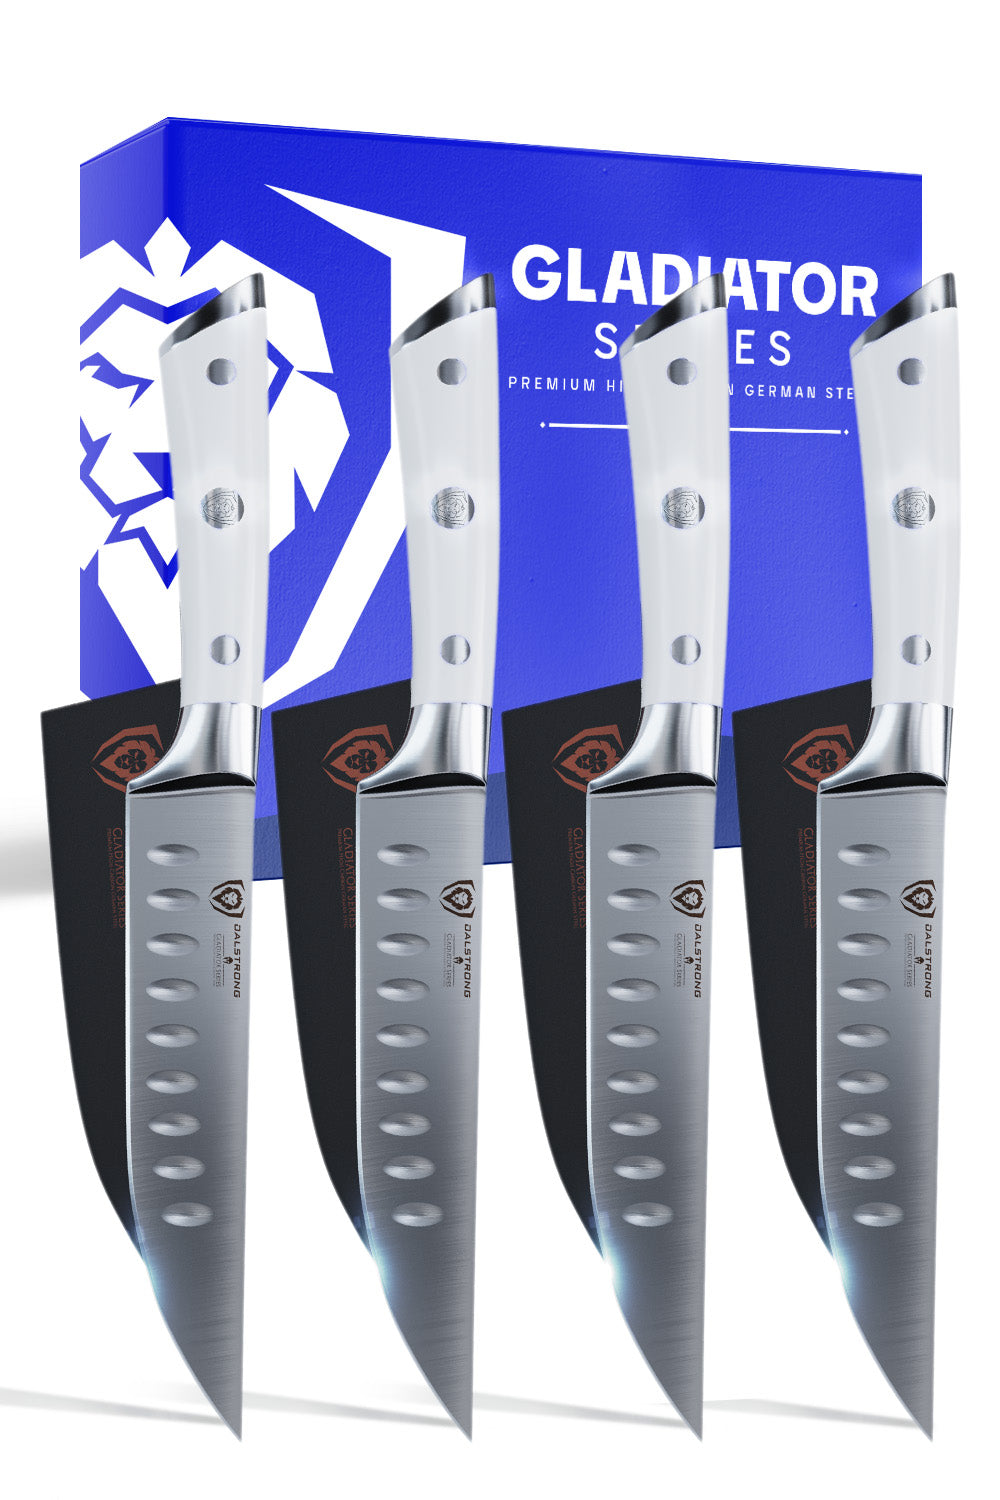 4 Piece Straight-Edge Steak Knife Set | White ABS Handles | Gladiator Series | Dalstrong ©